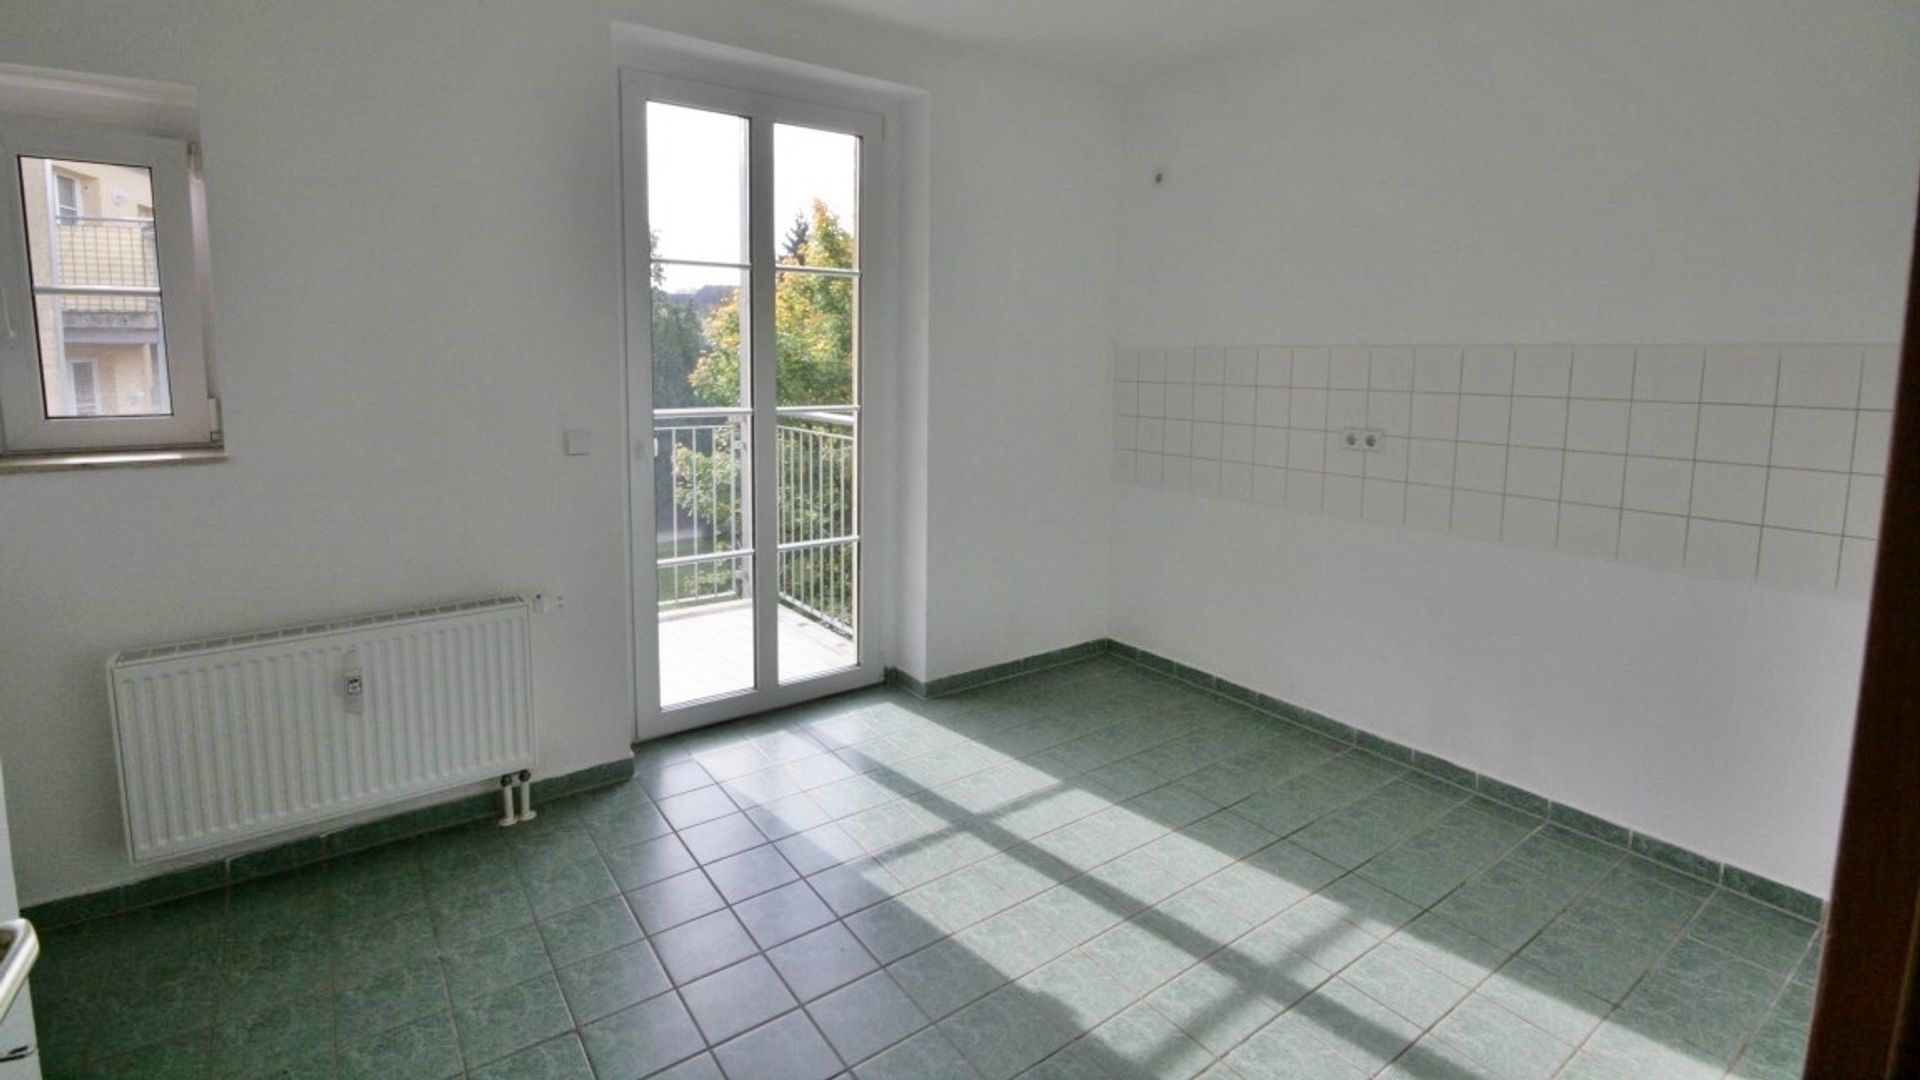 2 Bed Apartment At Neefestrasse 81a 09119 Chemnitz Germany